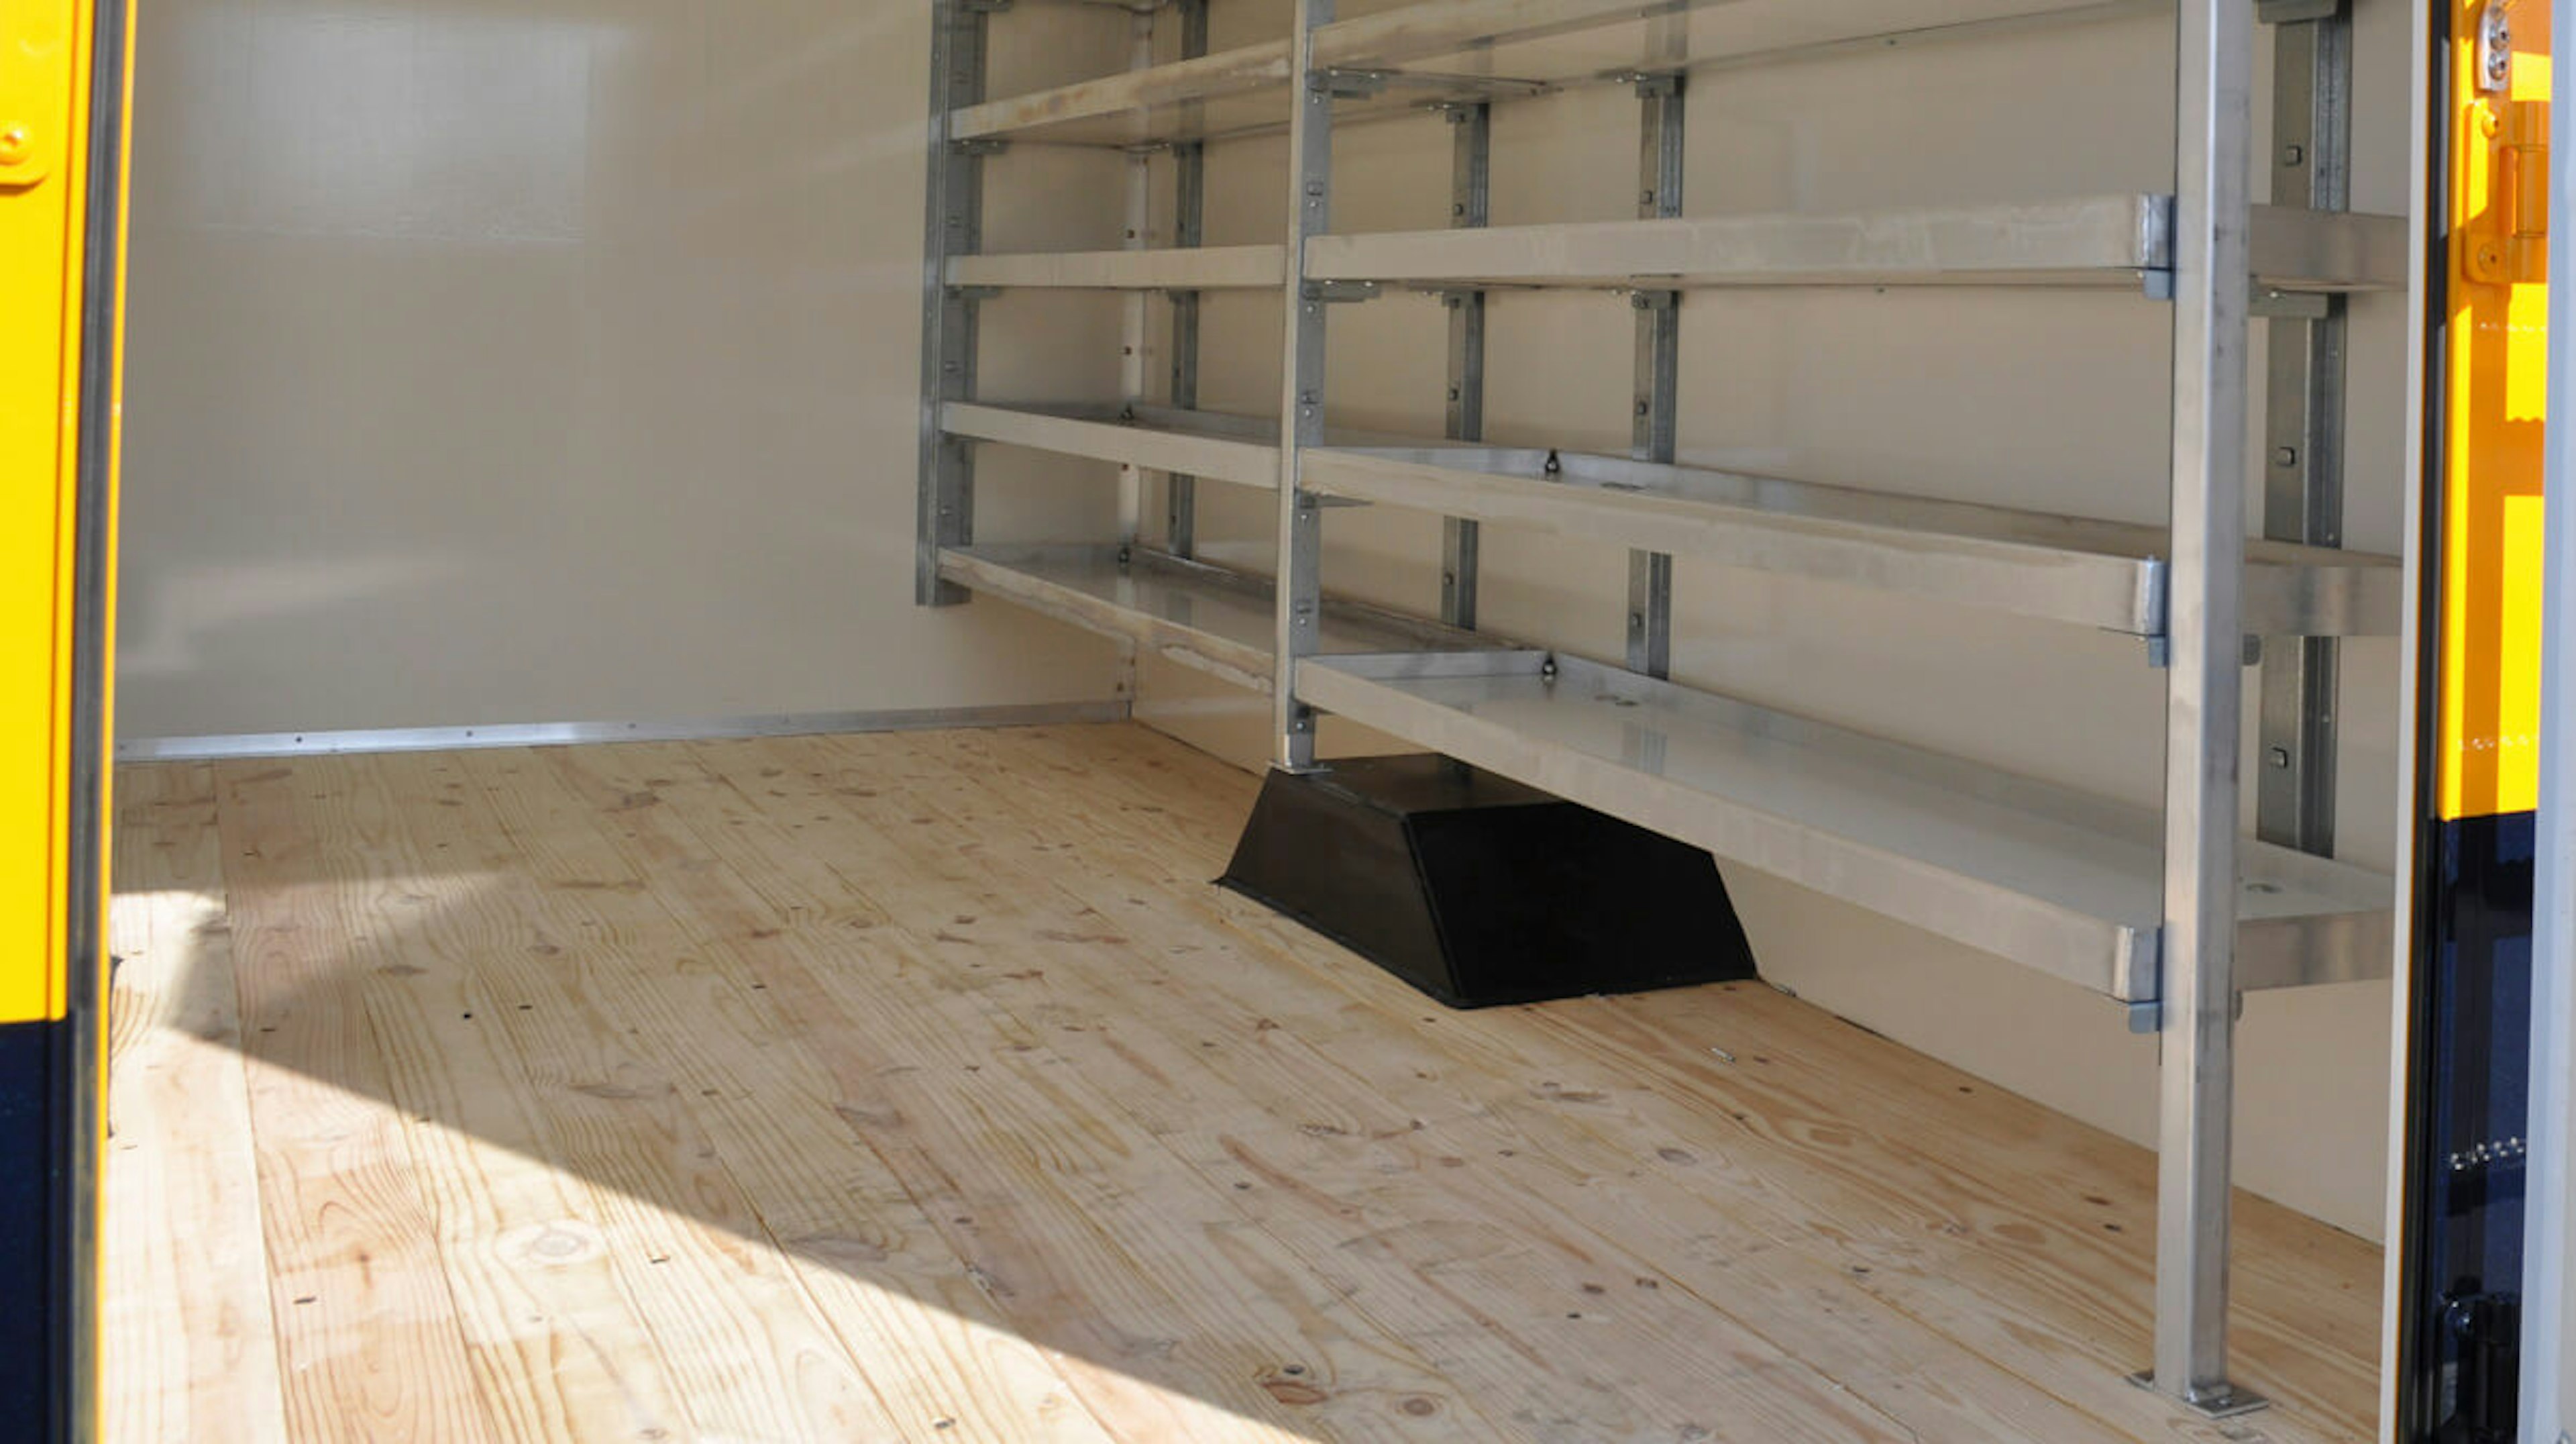 Cut-away with wood flooring and tons of storage space